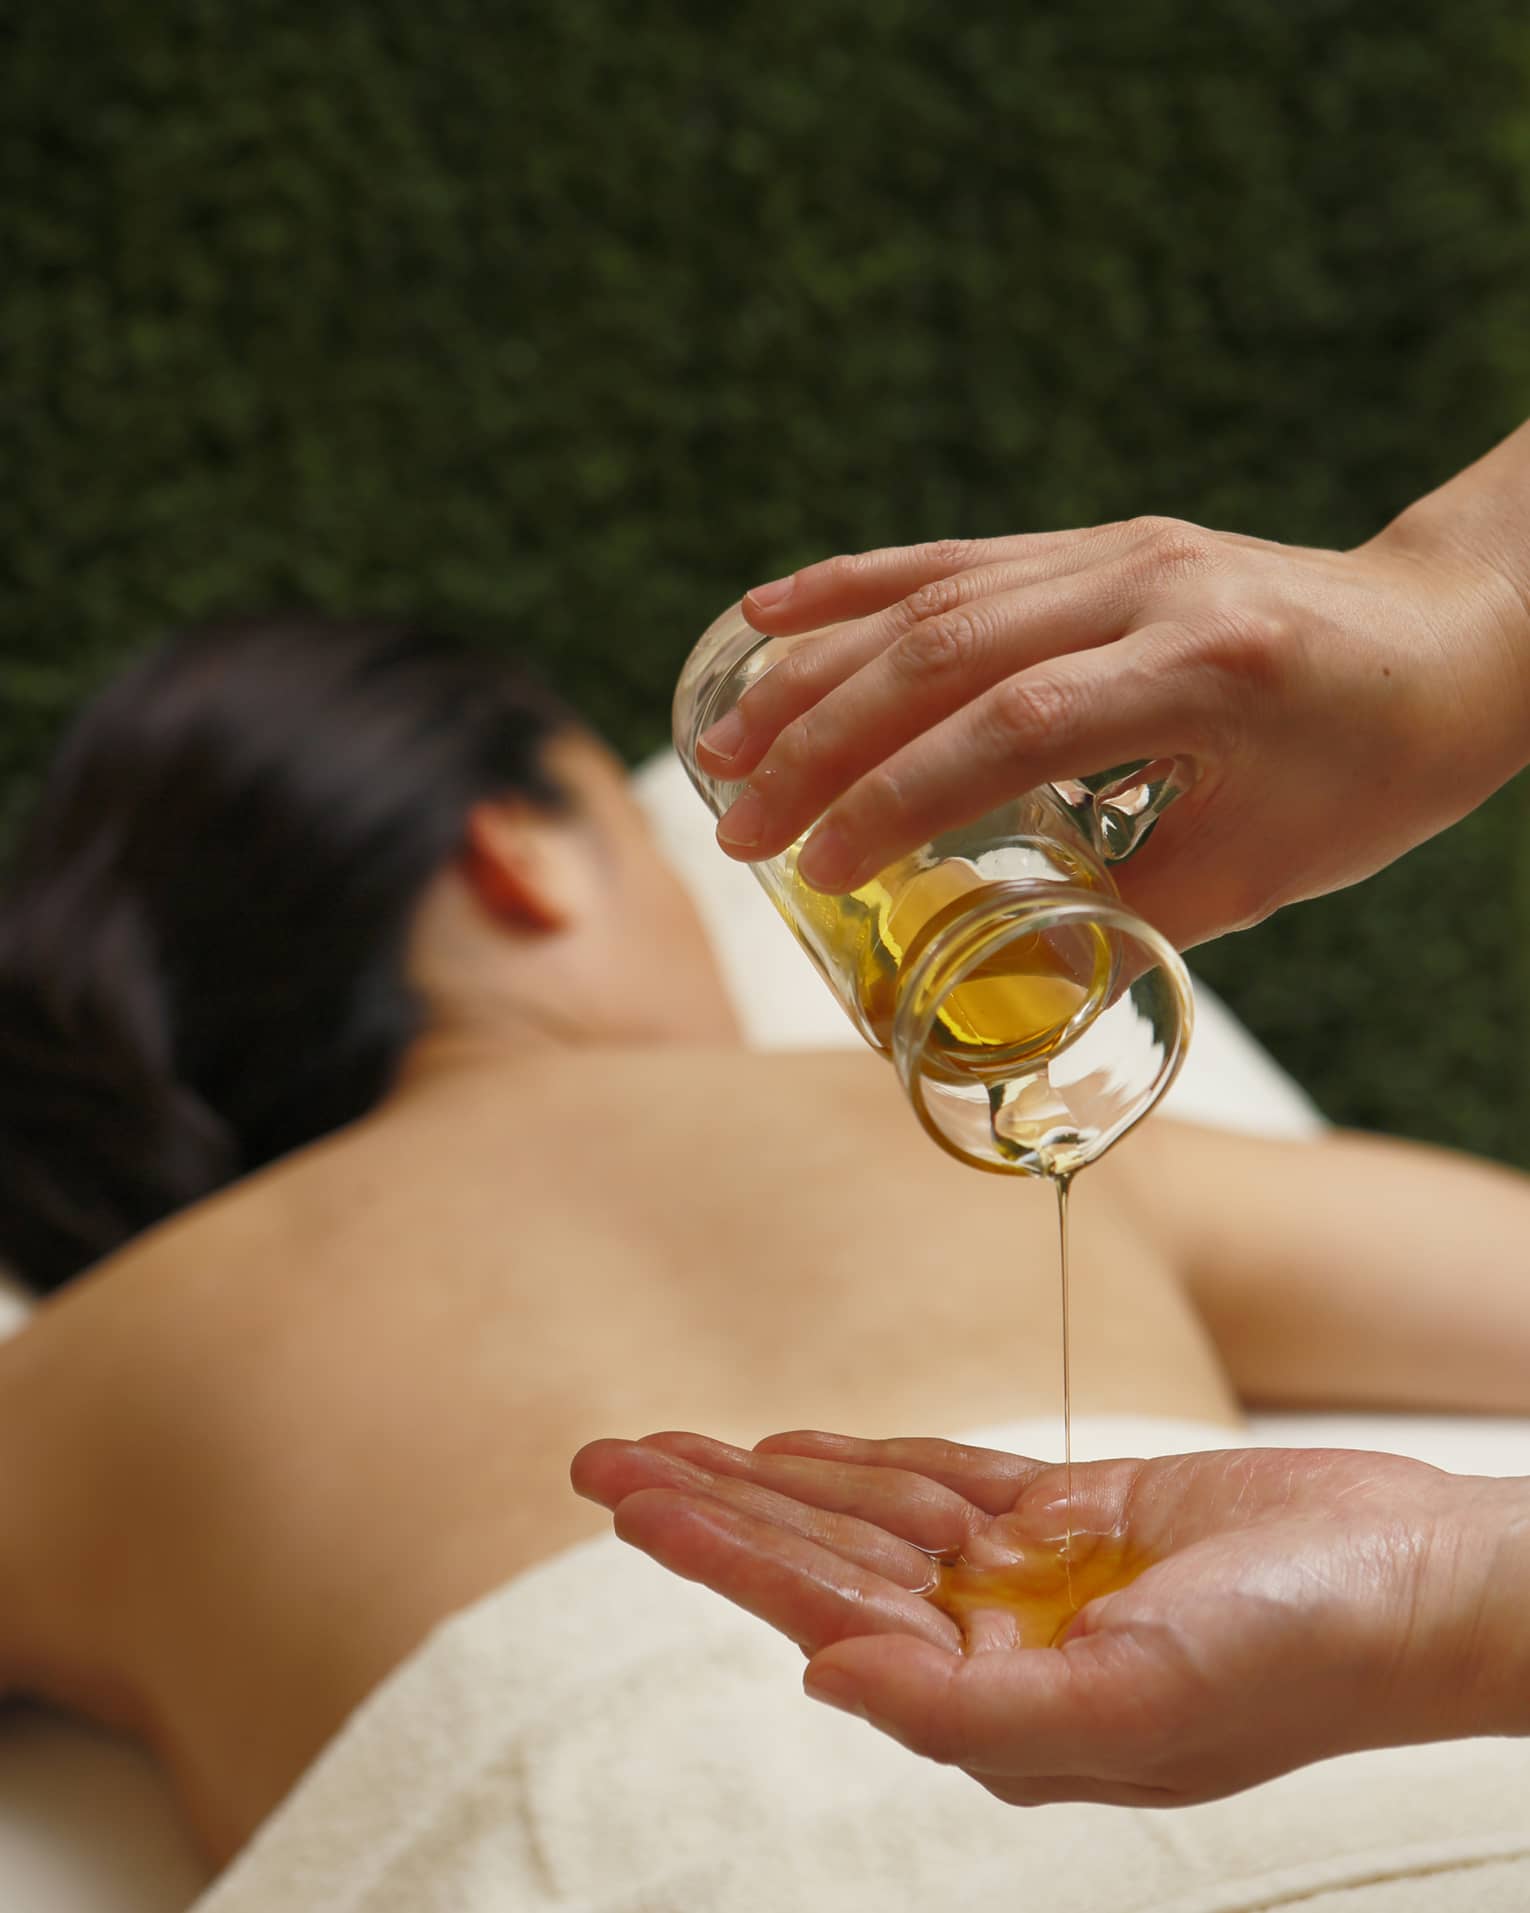 Spa staff pouring massage oil from glass jar in hand over woman lying on table